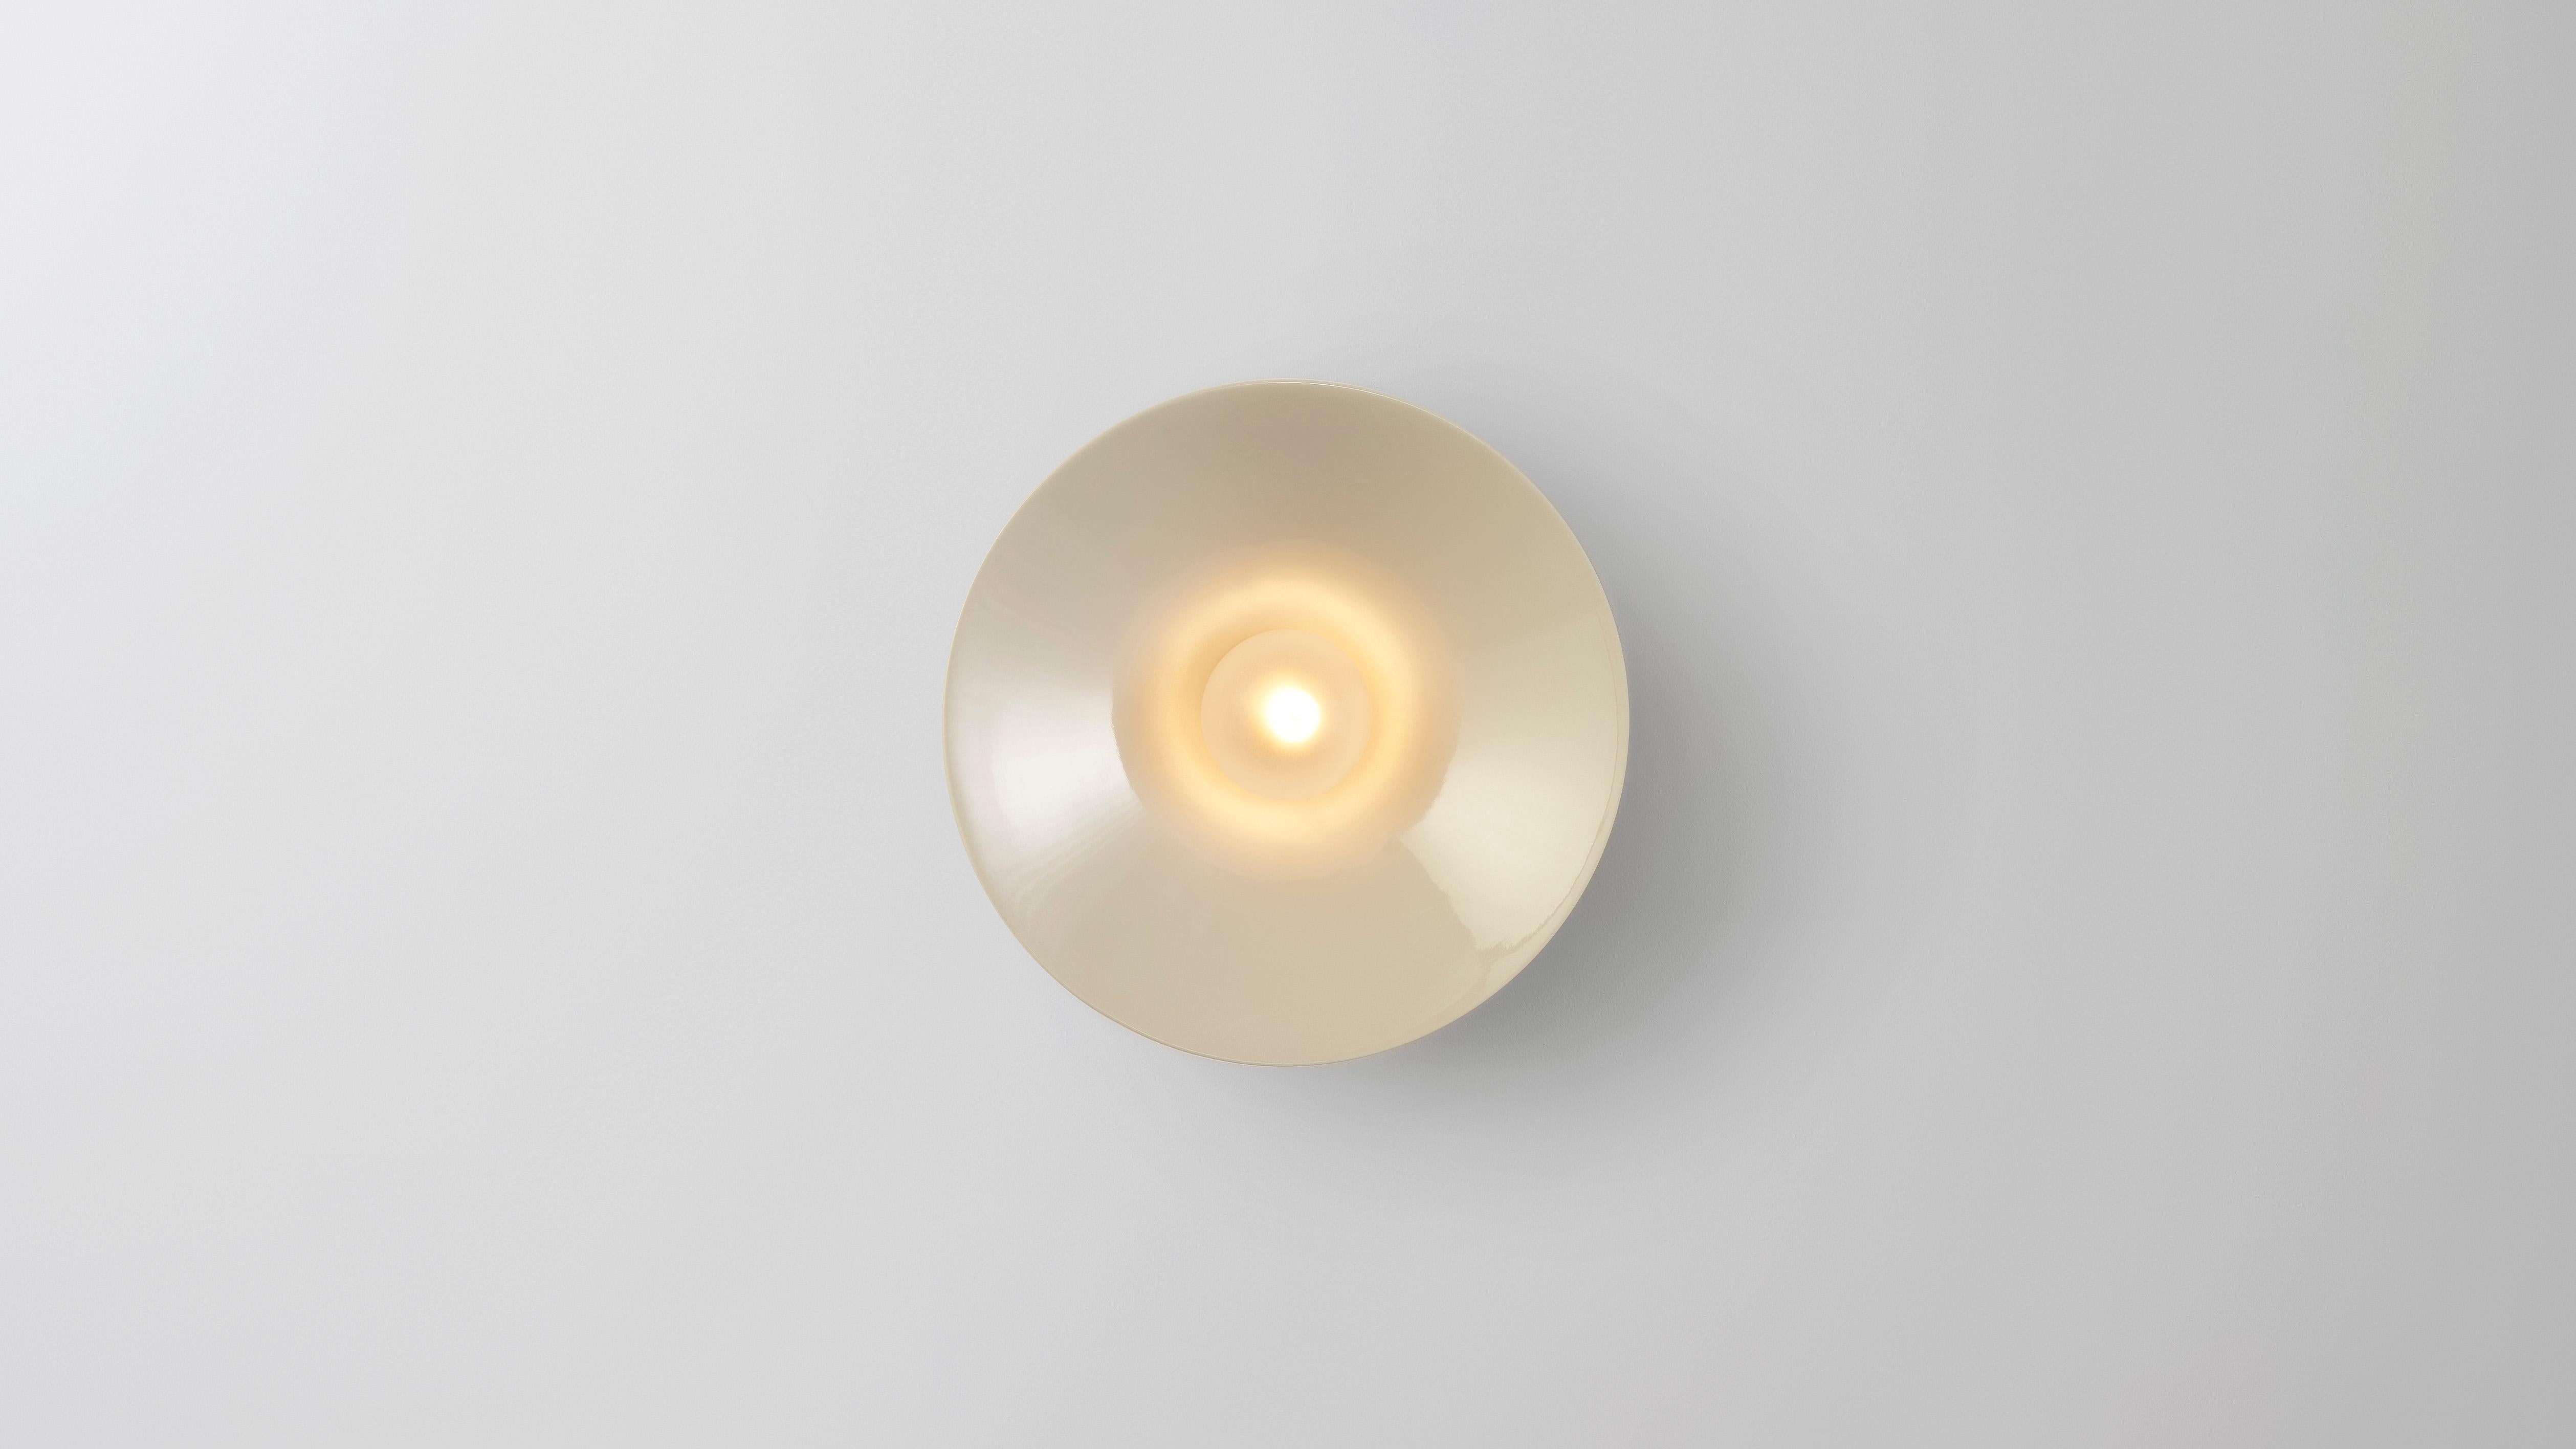 Anton in ceramic by Volker Haug
Anton series
Dimensions: Ø 18 x D 10 cm.
Materials: Cast ceramic
Glaze: Clear
Lamp: G9 LED (240V / 120V US). 12V option available
Glass bulb: 4.5 cm Ø, Frosted
Weight: 1.5kg

Form follows force. The Anton series